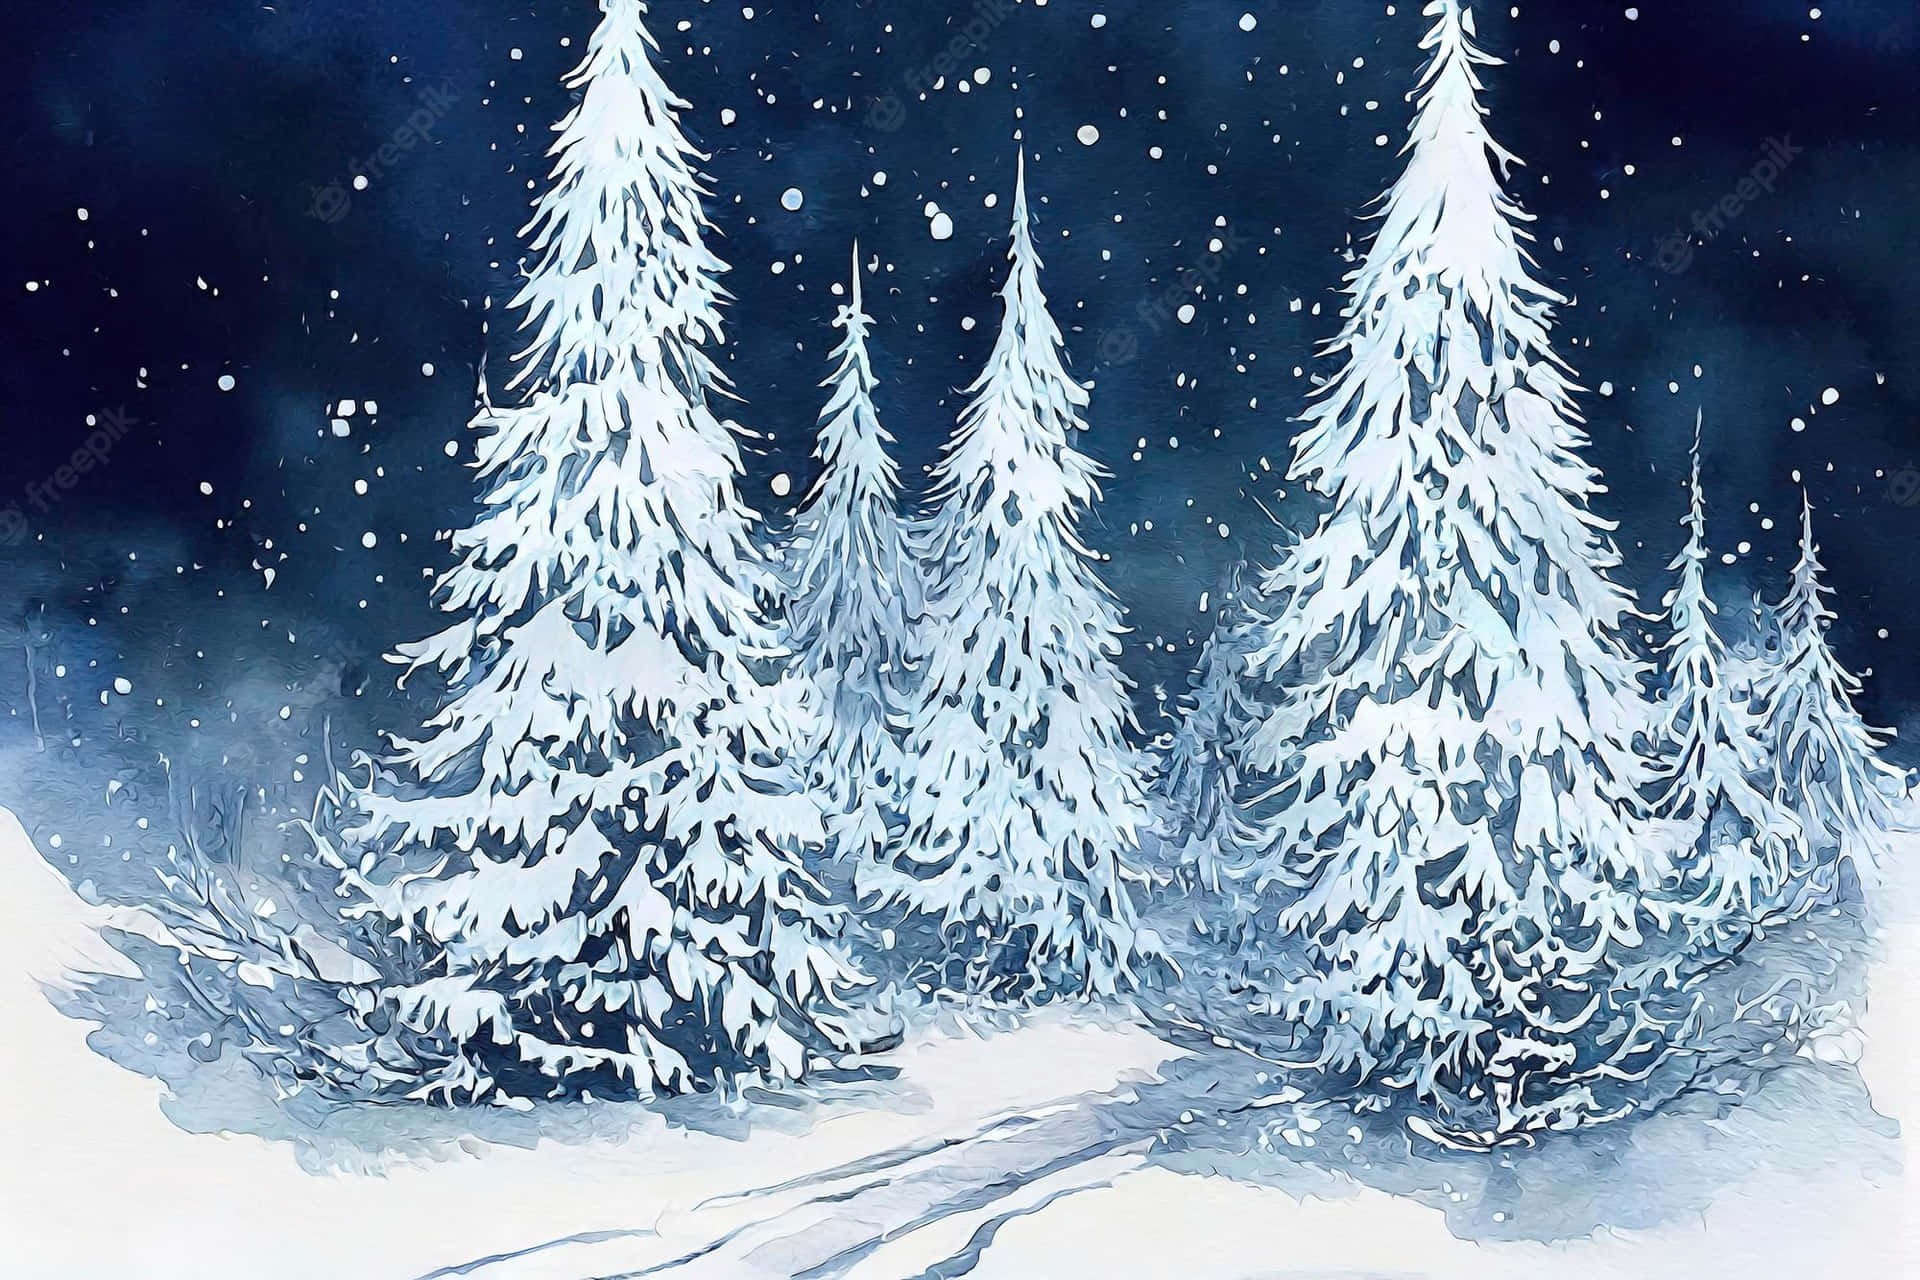 Celebrate this festive season and let the Christmas Winter Wonderland charm carry you away! Wallpaper